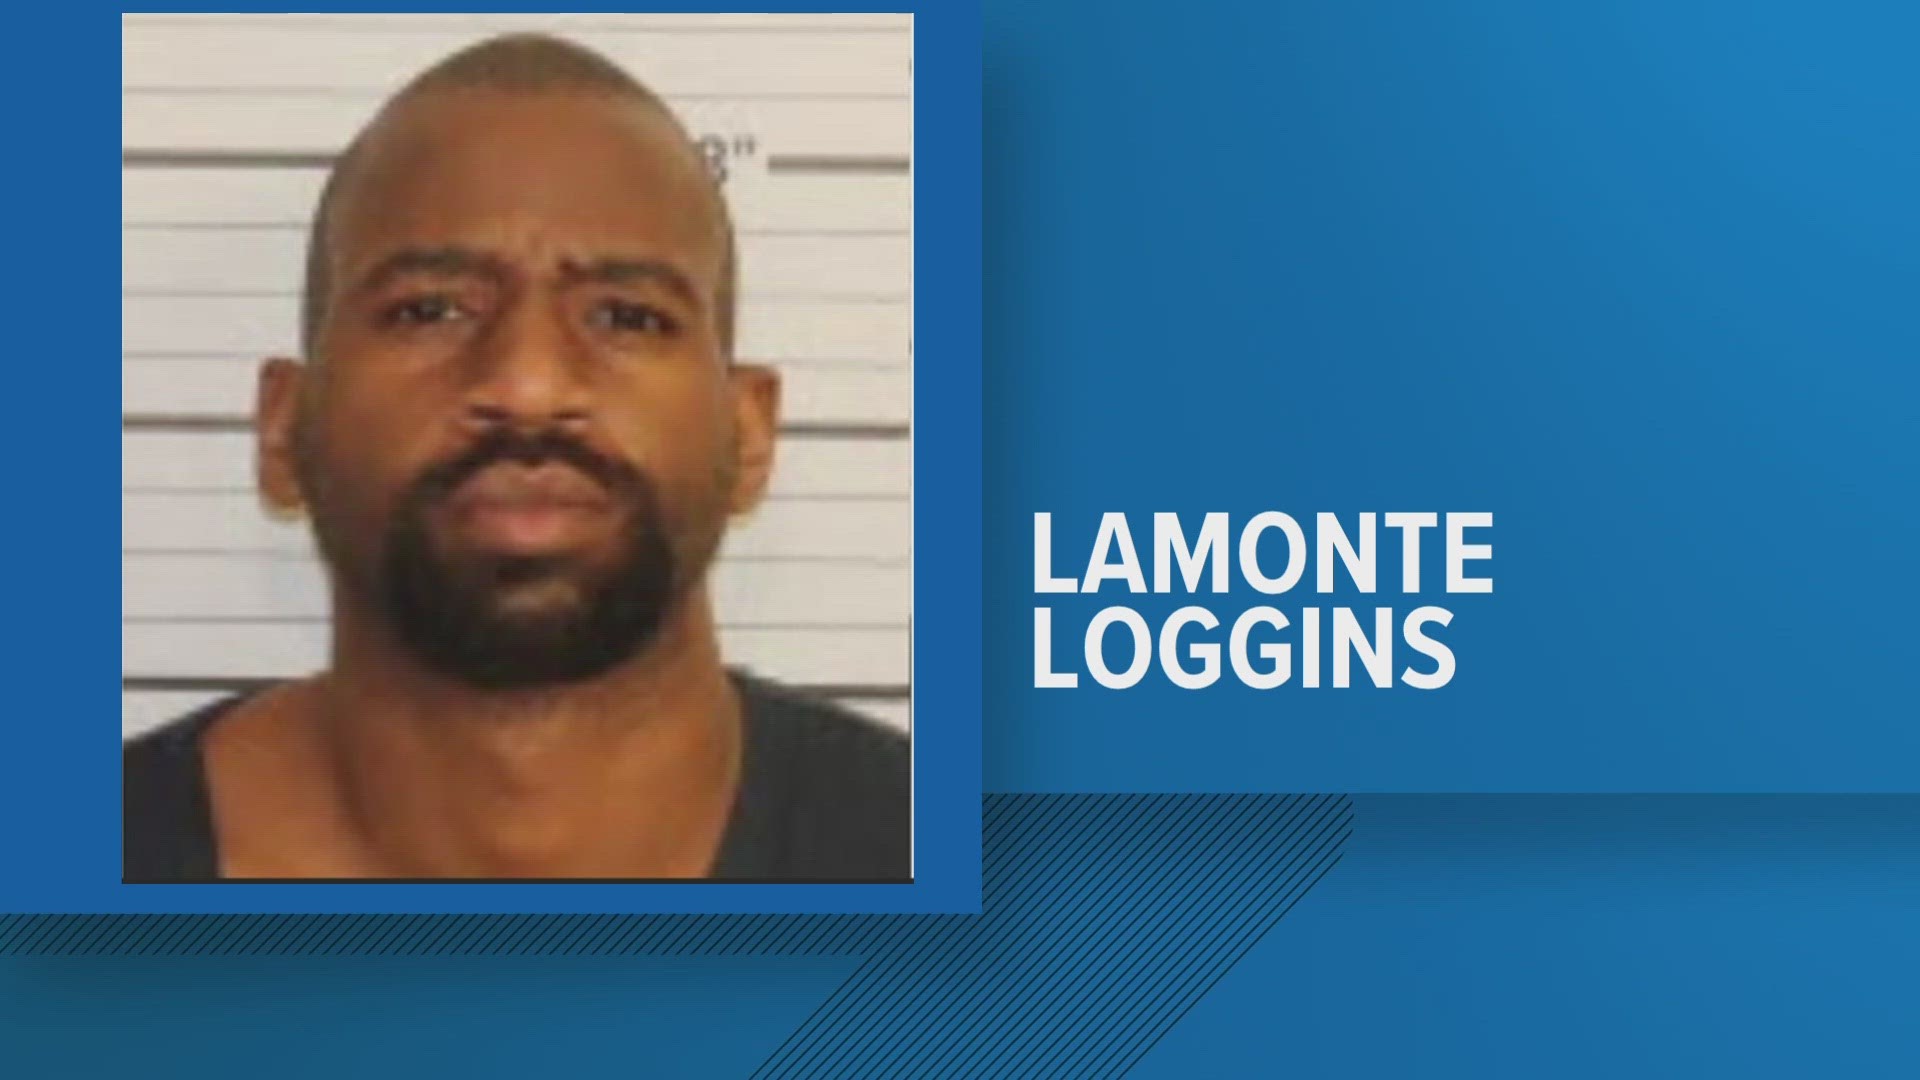 Lamonte Loggins, 30, was charged with murdering Abd El Ghader Sylla, 30, at a Shell gas station, in 2020. A jury reached a guilty verdict on Wednesday.